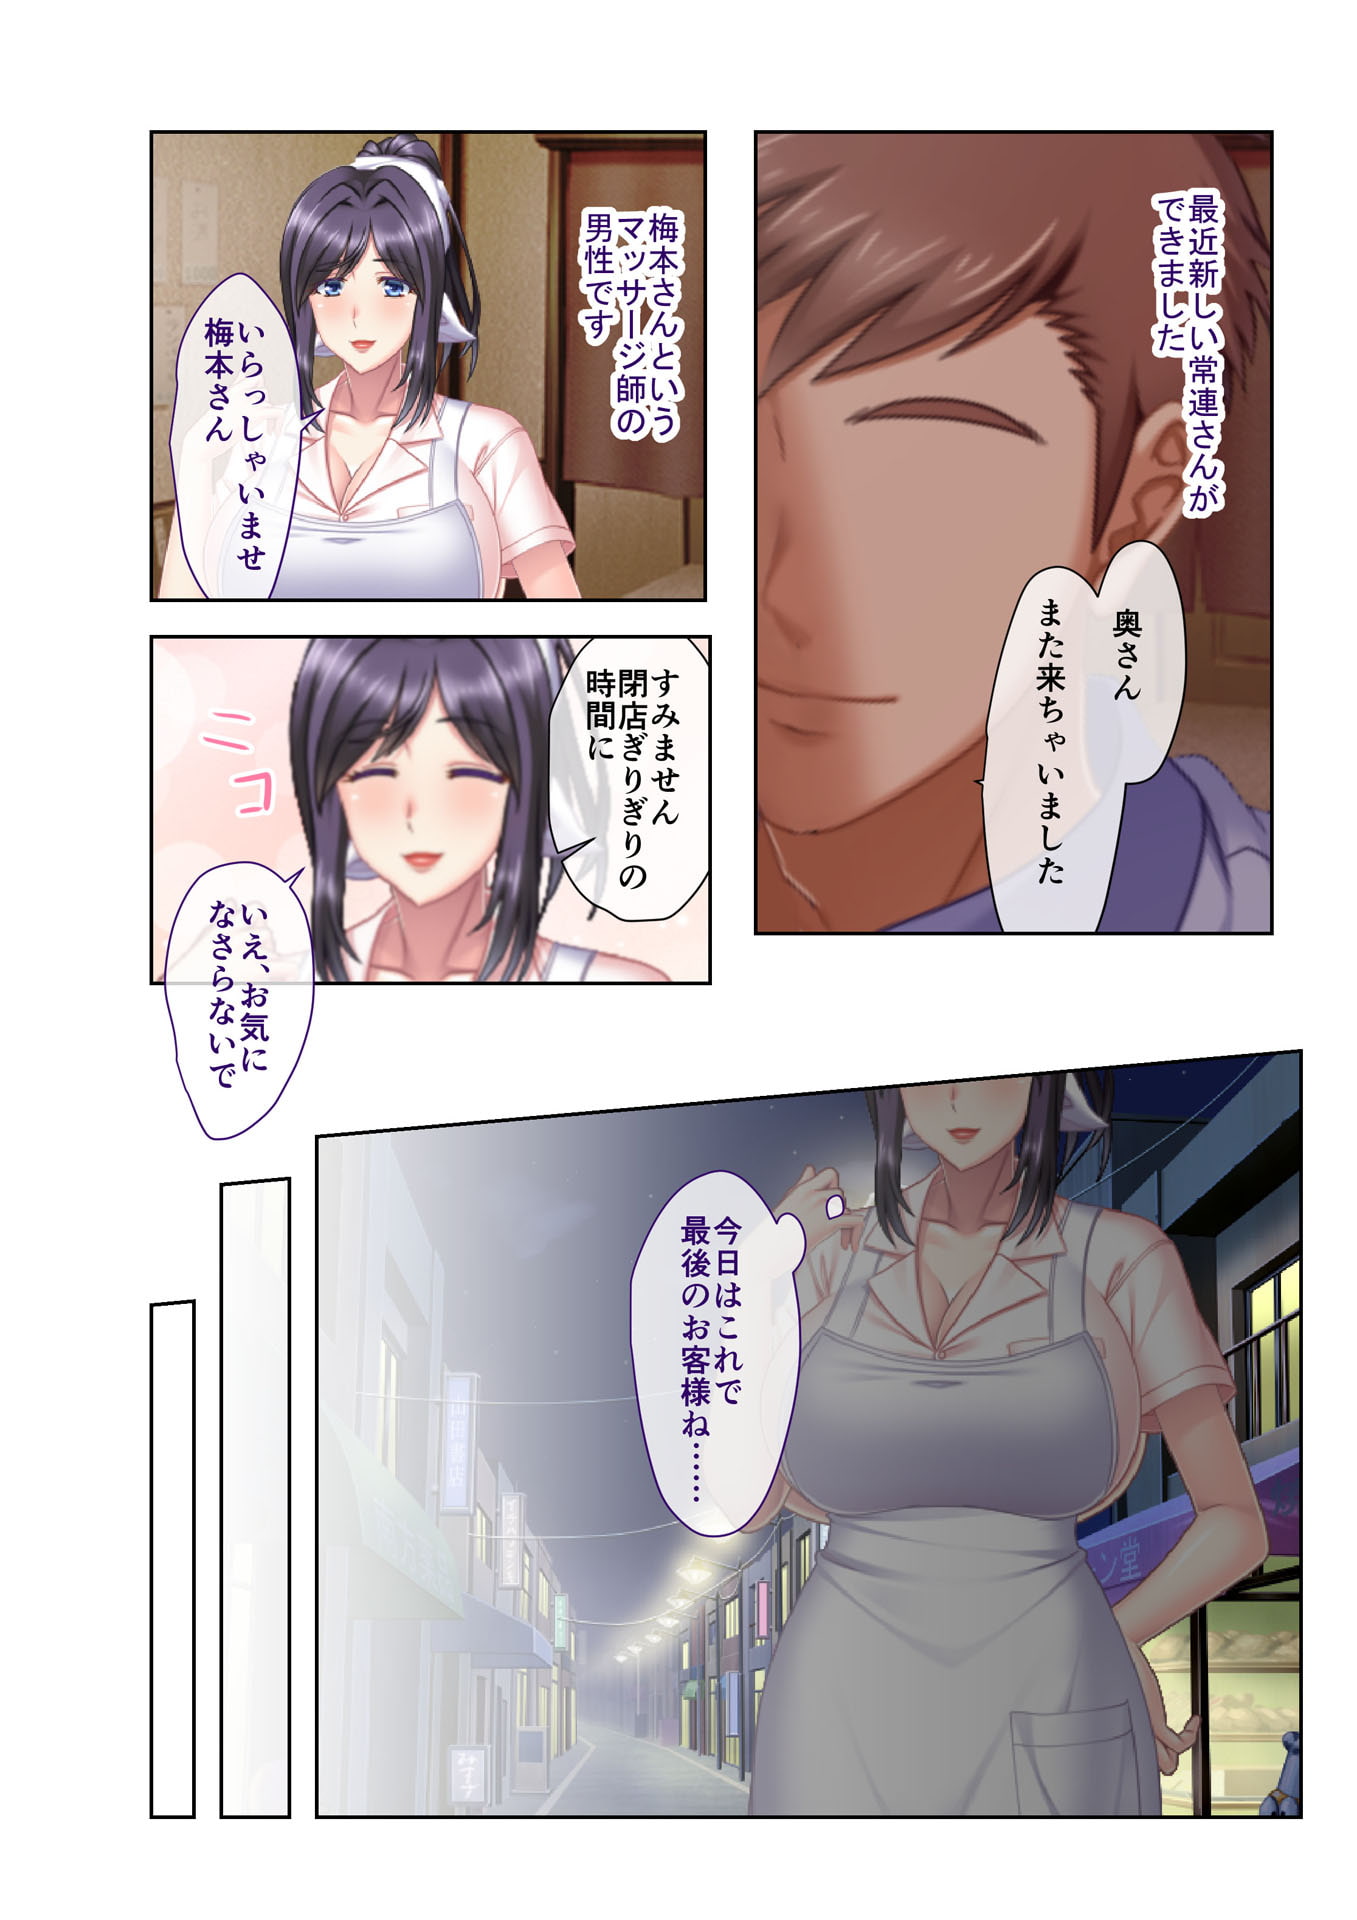 Bangable Cafeteria - Busty Beauties Moan In Ero Massage! (1) [Full Color Comic Ver]